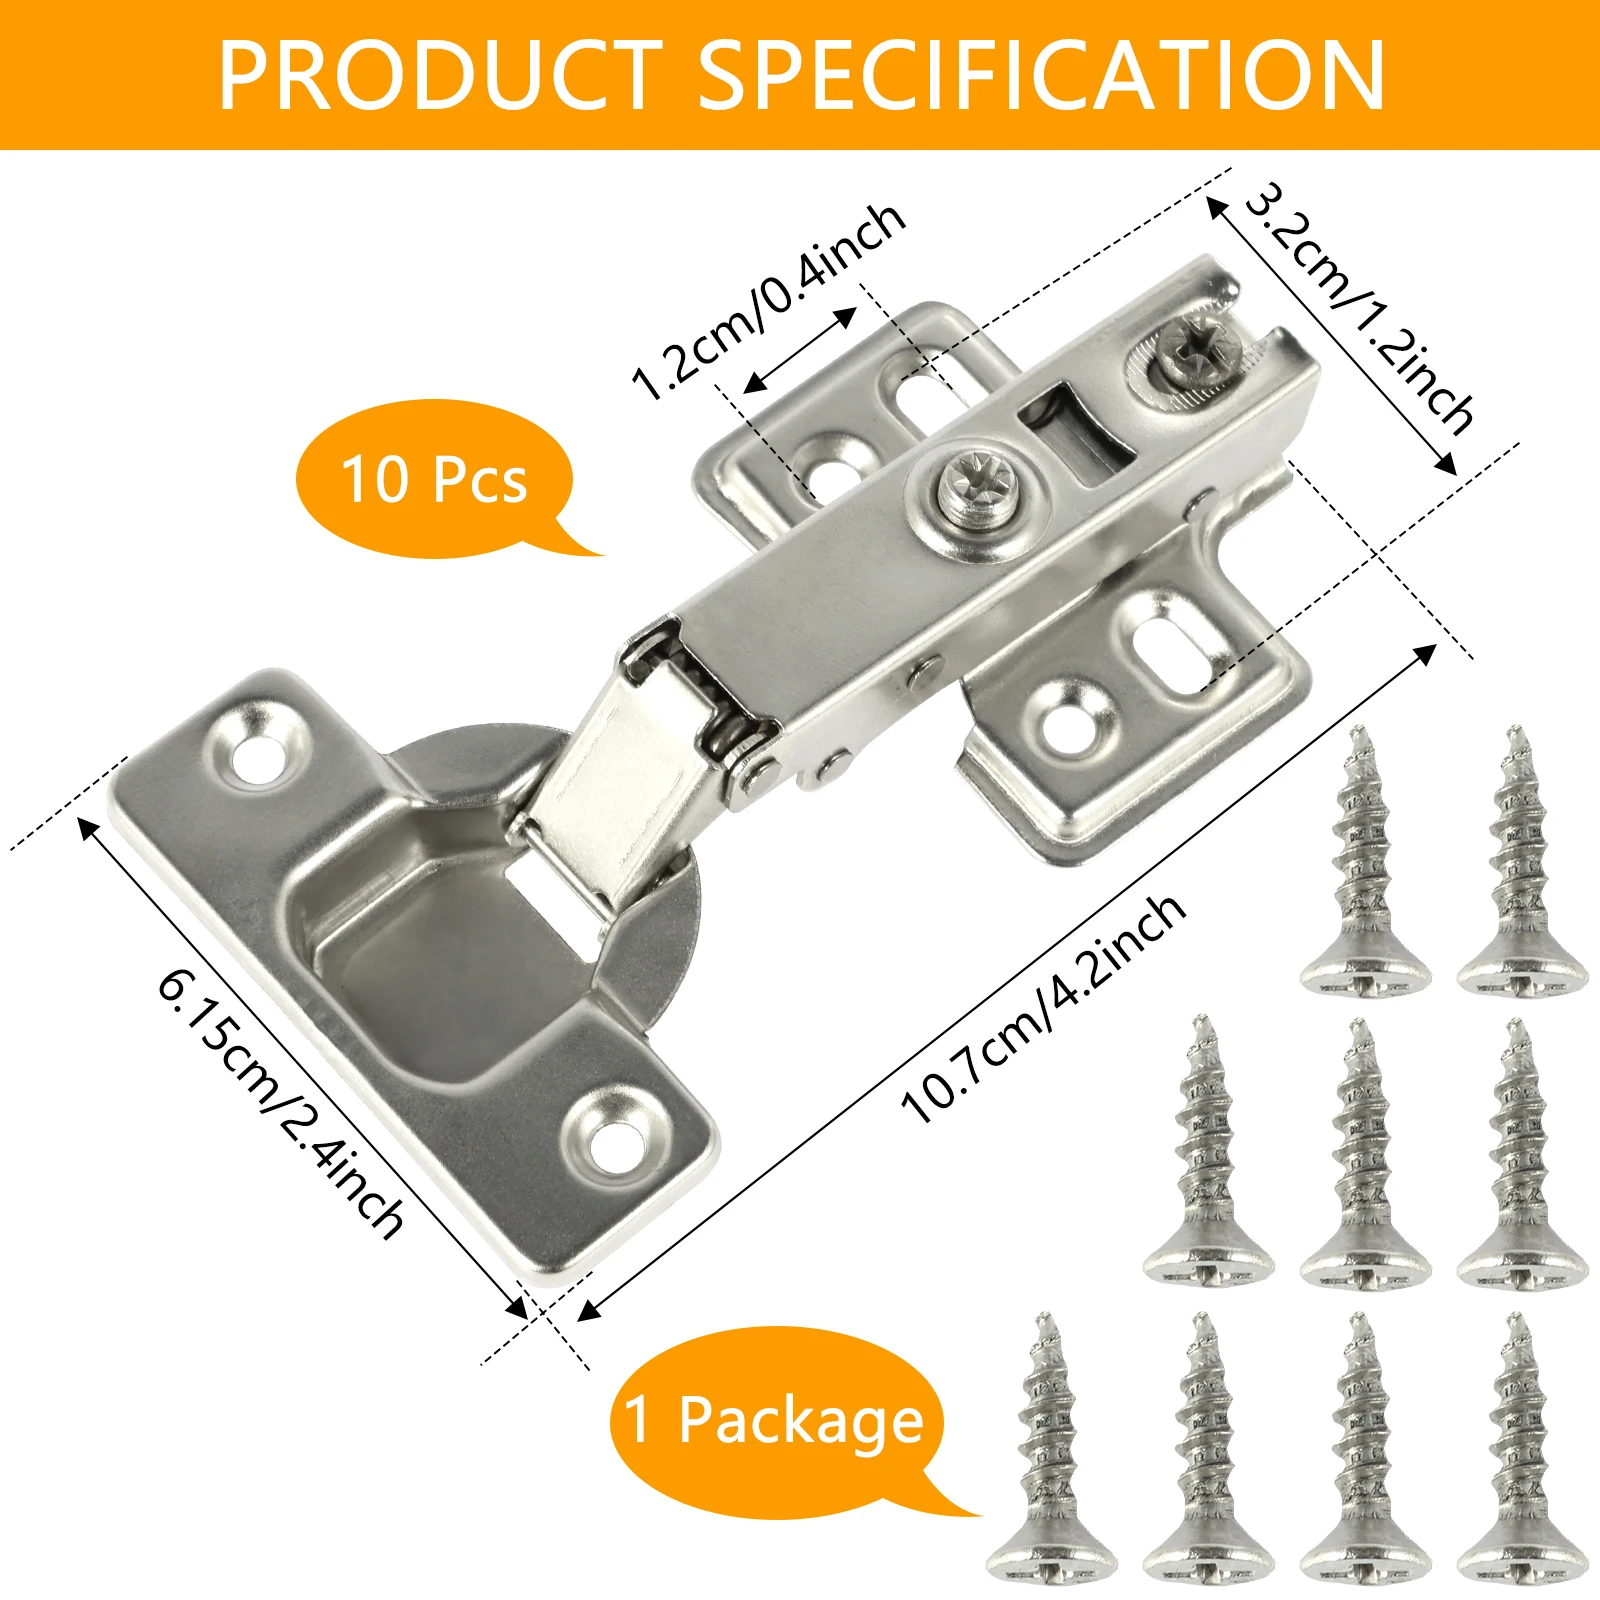 10Pcs Cupboard Hinges Full Overlay Mute Cabinet Door Hinges Set with Screws 95°-105° Opening Angle for Kitchen Bathroom Cabinet